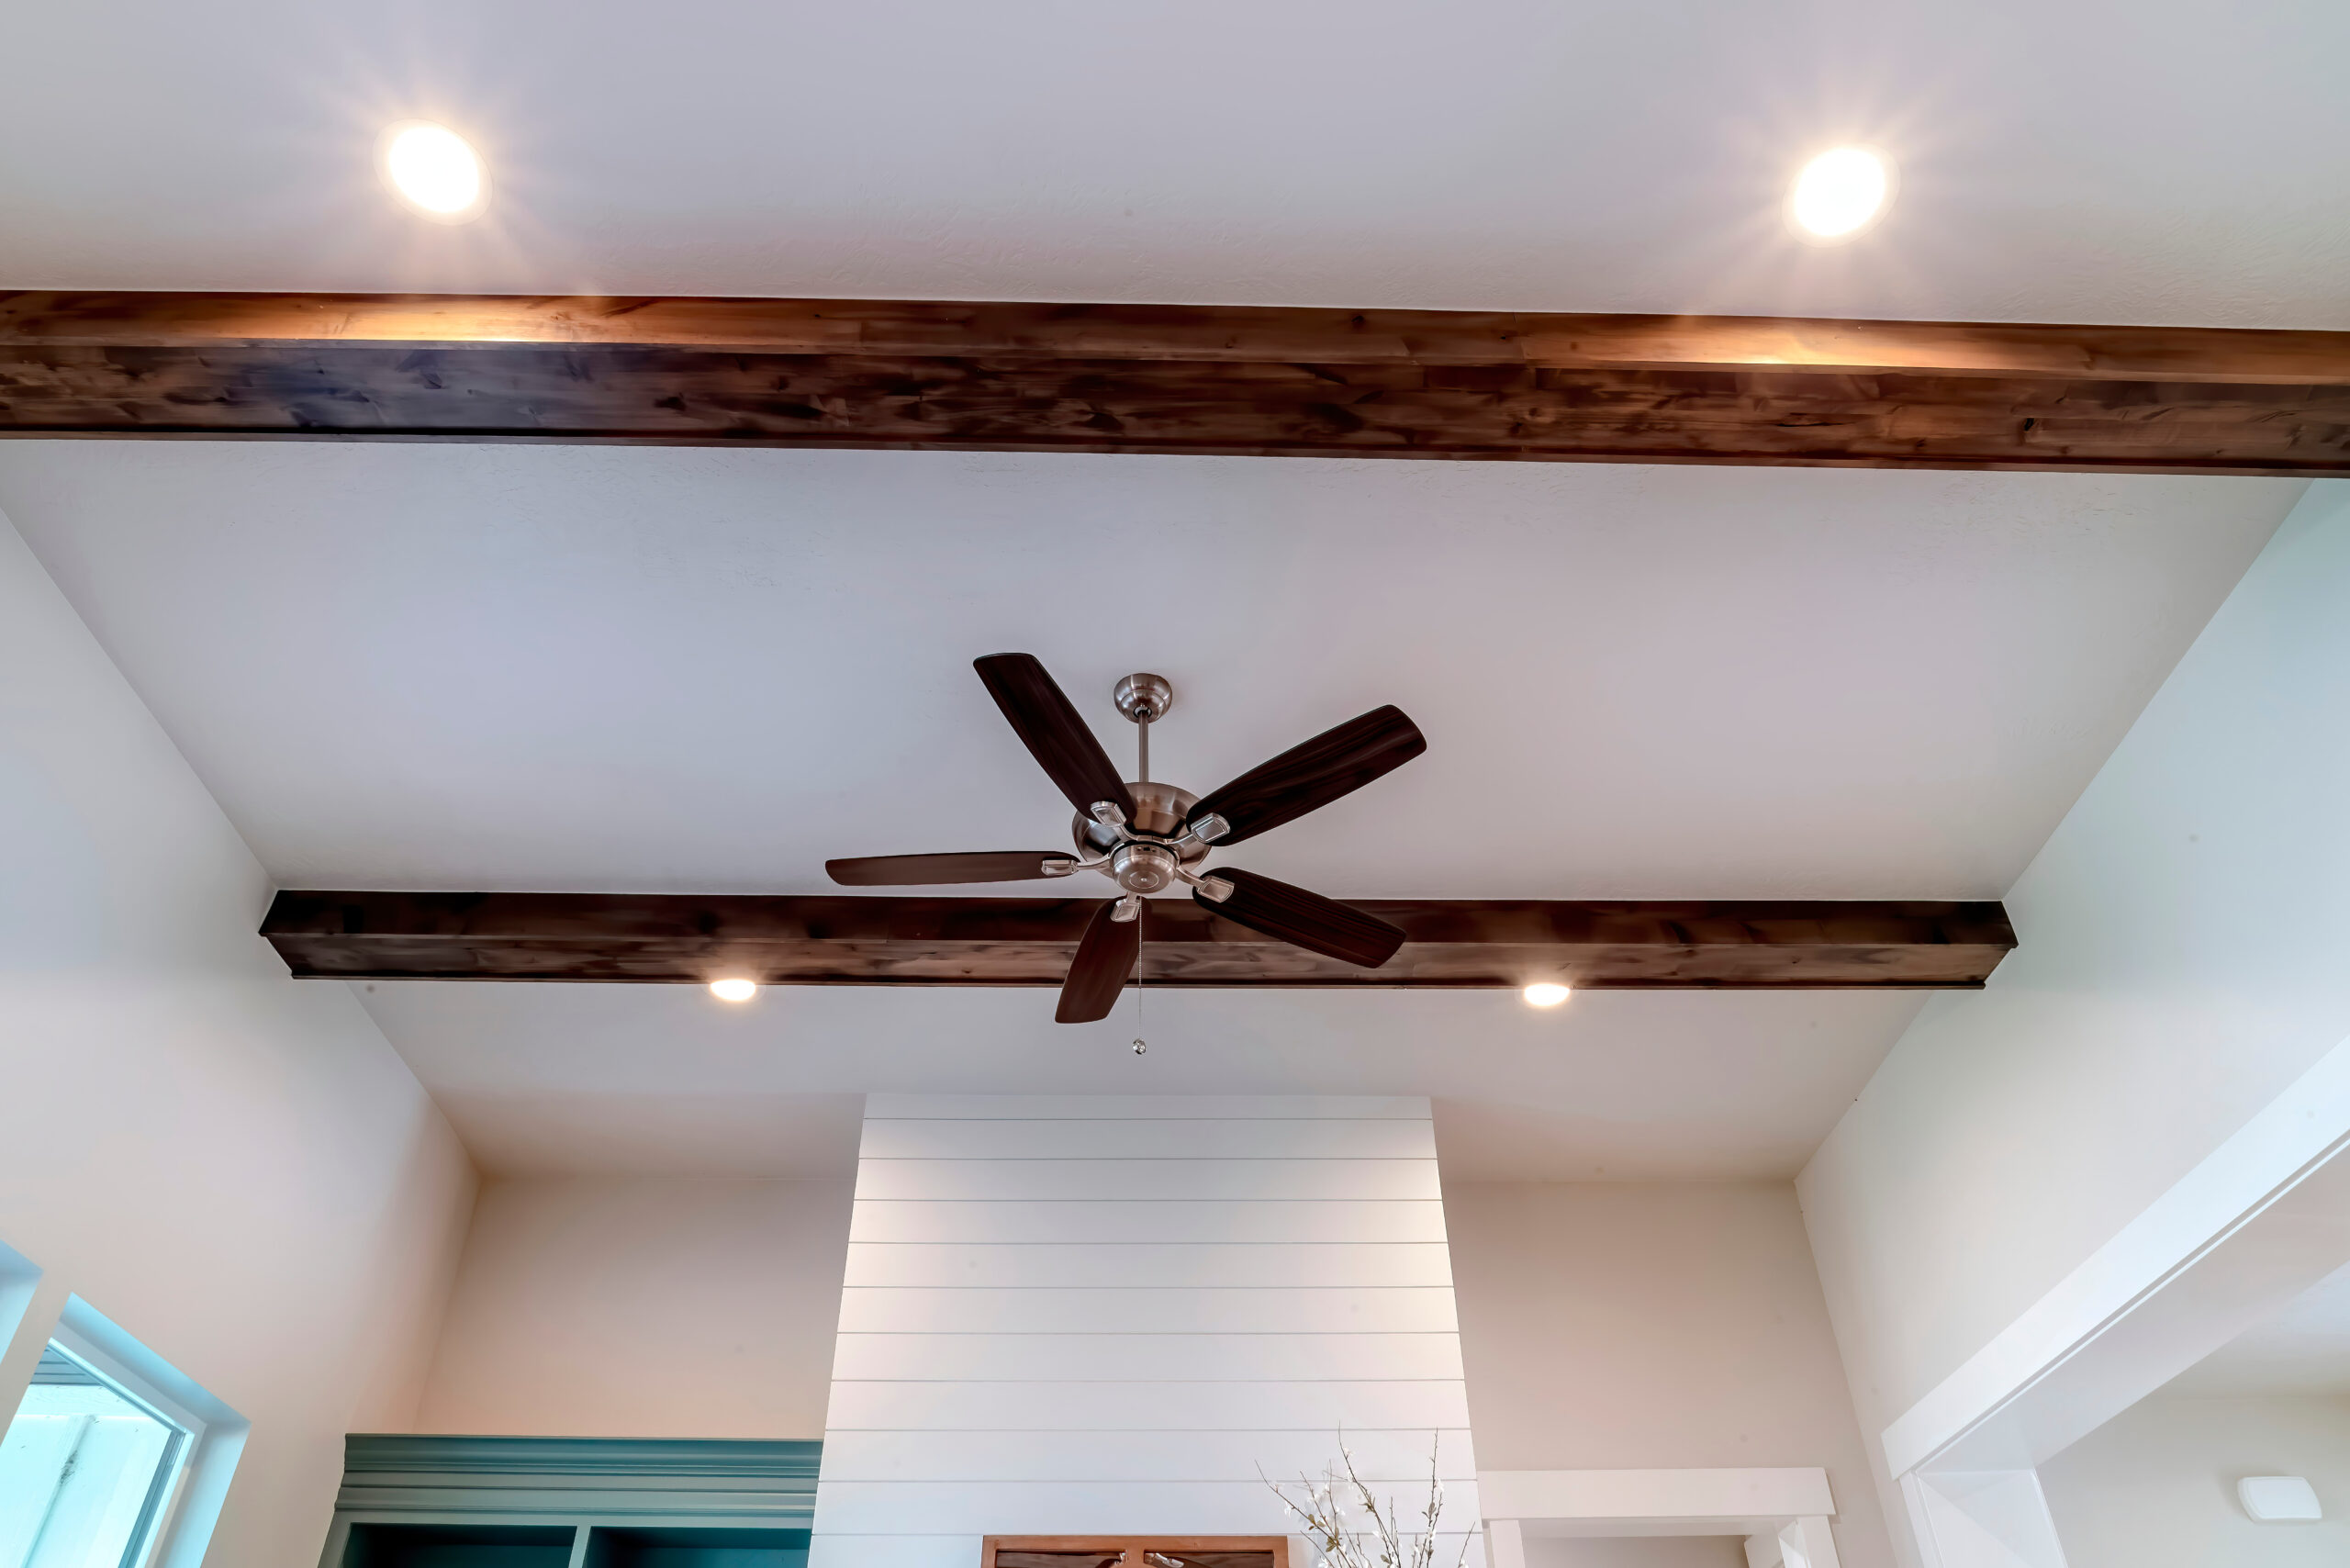 This is a picture for a blog about residential ceiling fan installation before the summer heat.